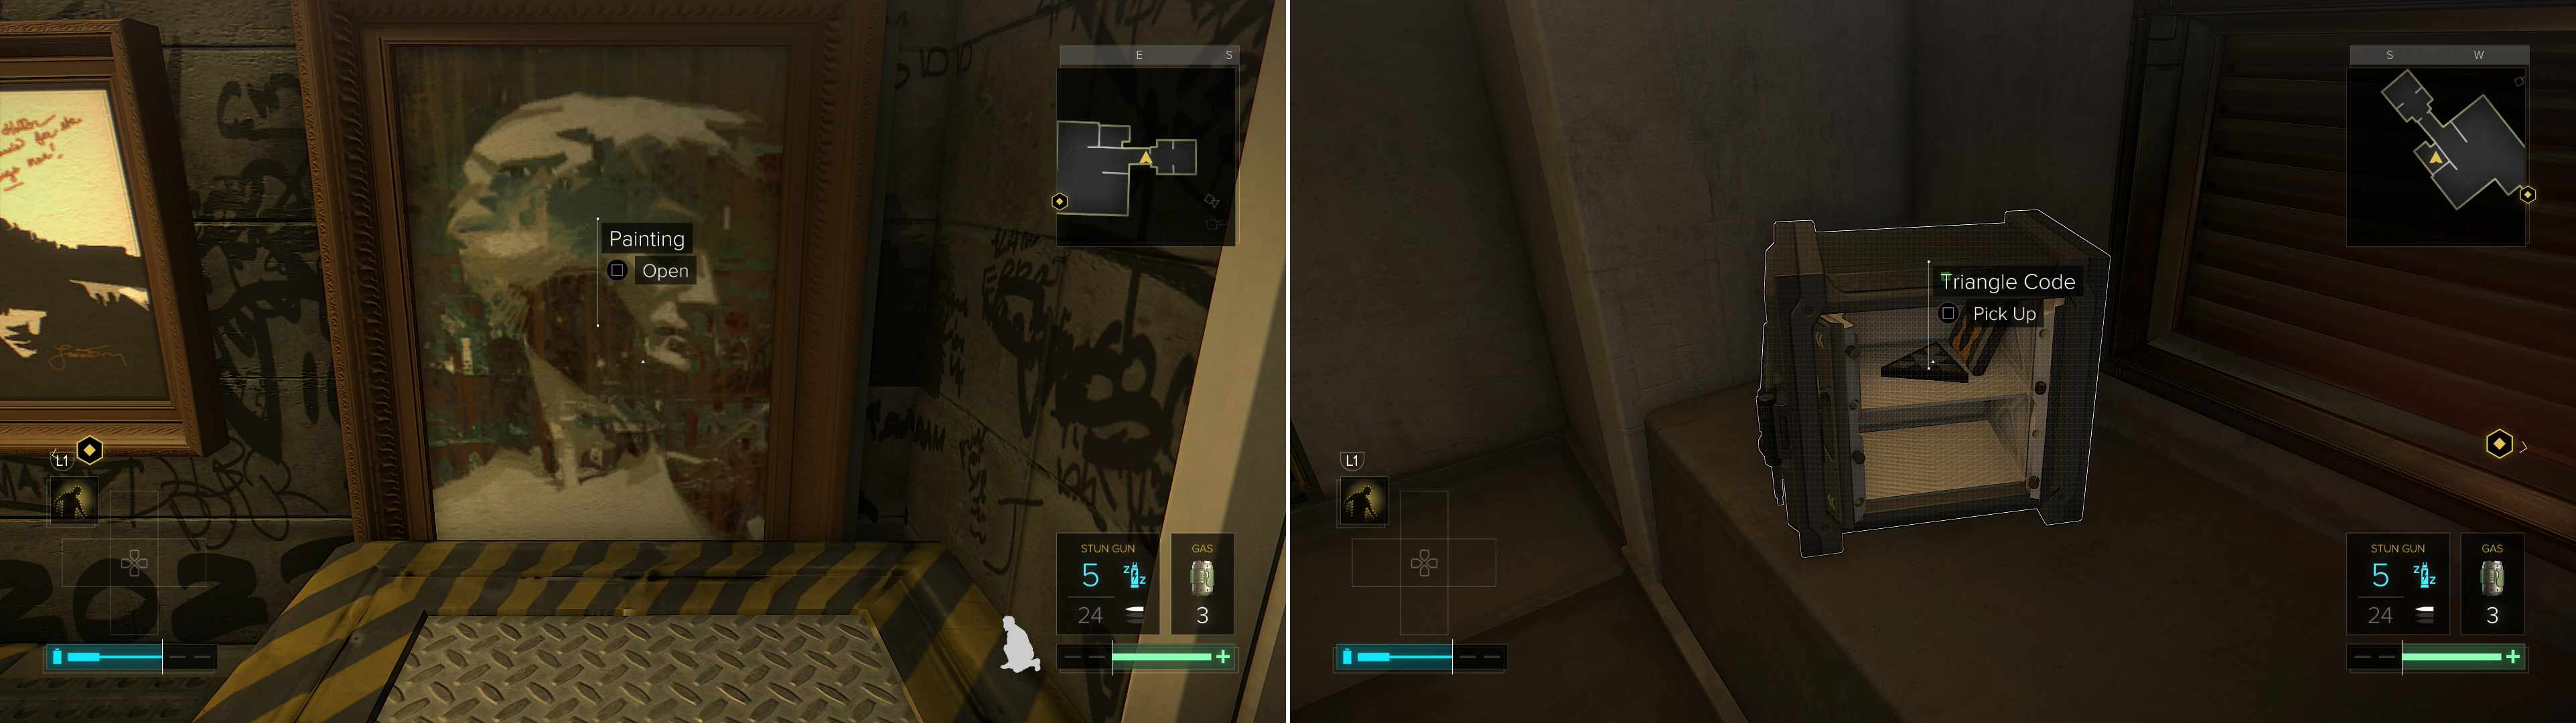 Move a painting out of the way and enter a gas-filled chamber beyond (left). Gain access to Koller's safe to score a Praxis Kit (right).